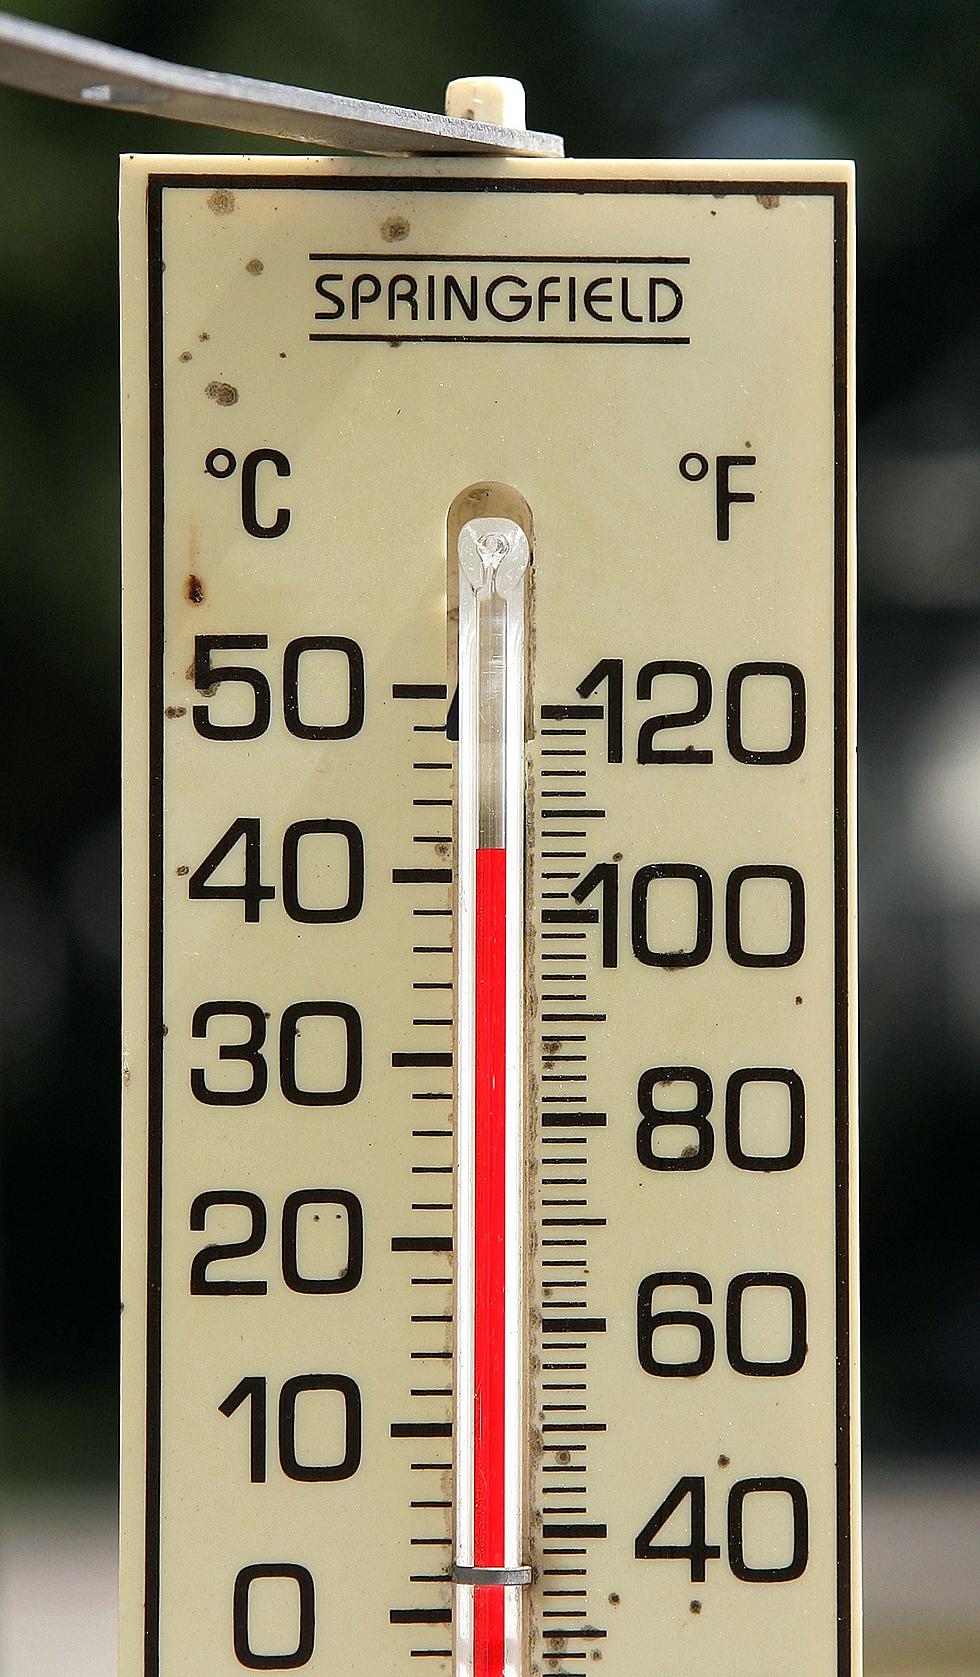 Vermont Man Walked Through Town Naked Because "It's Very Hot"